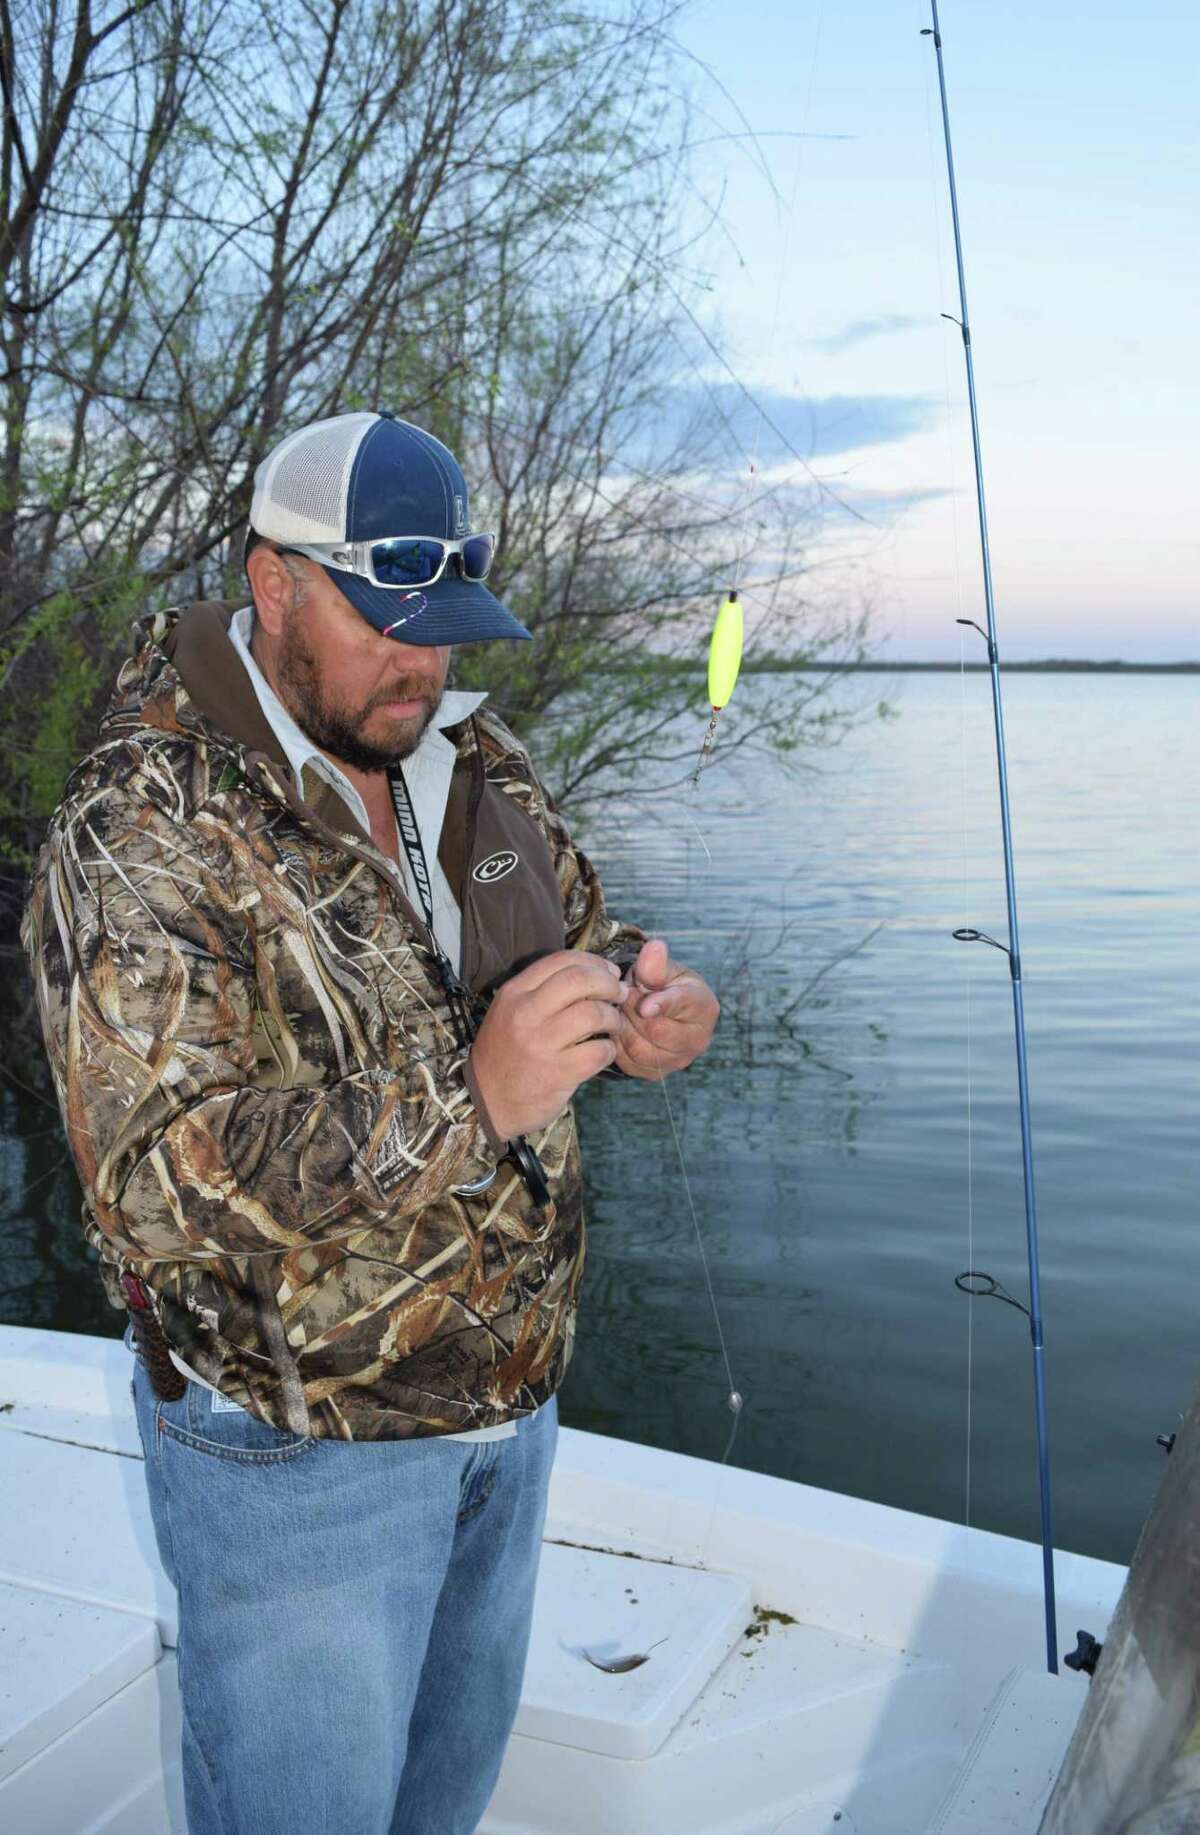 Guide and bait shop owner Bud Council puts together one of his special crappie rigs before tempting spring spawning crappie with minnows in shallow water along the shoreline of Choke Canyon Reservoir.